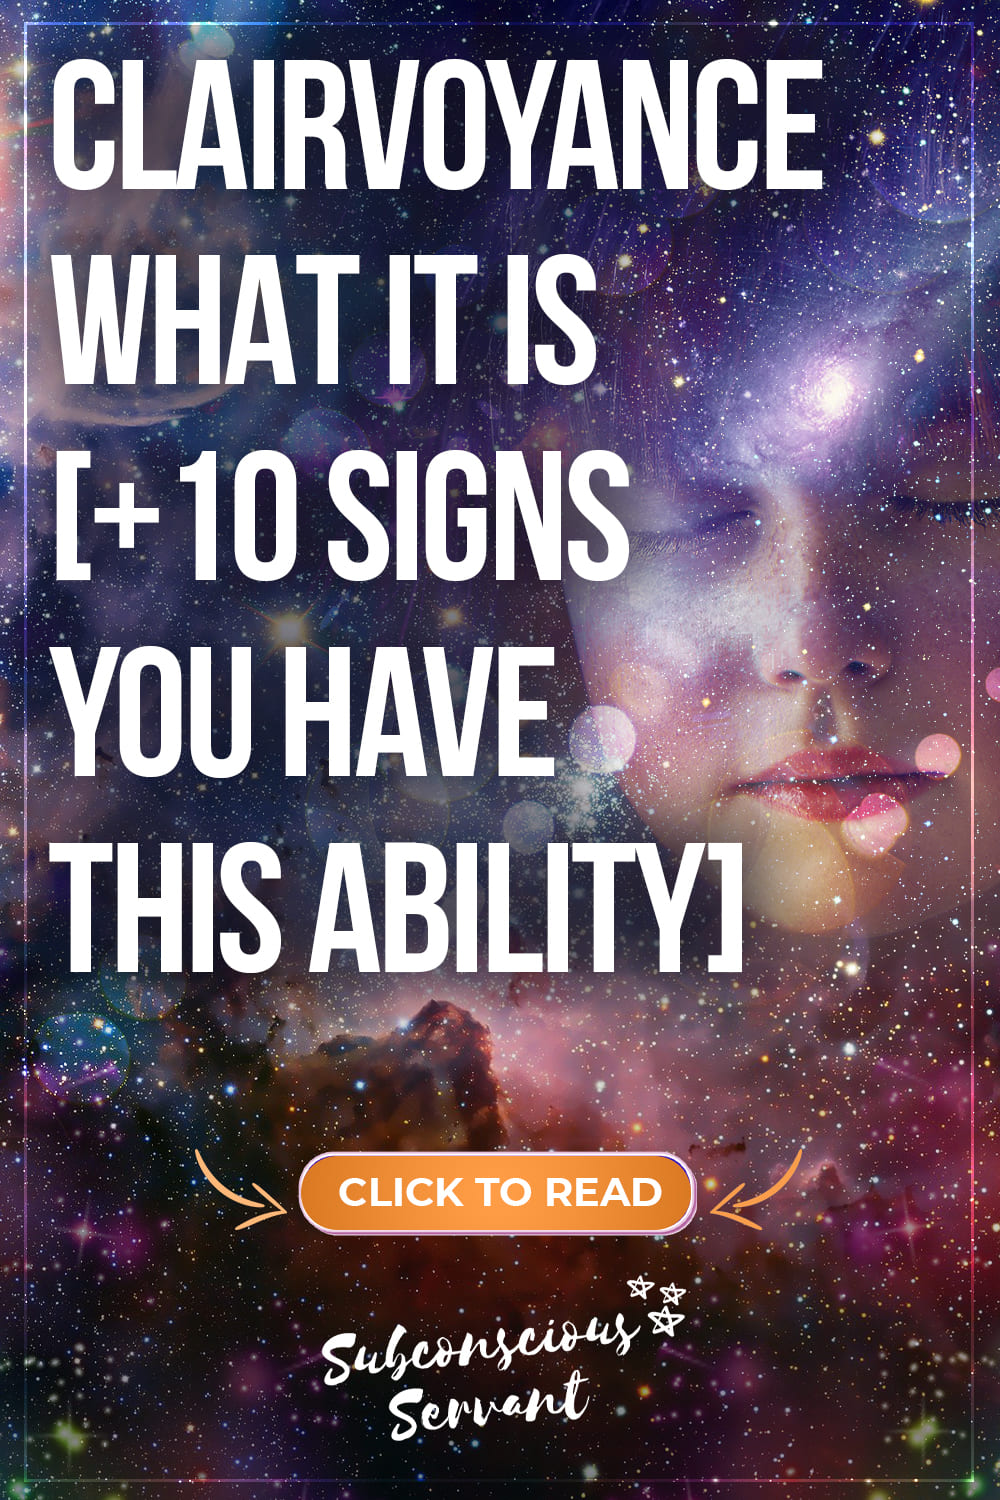 Clairvoyance: What It Is + 10 Signs You Have This Ability